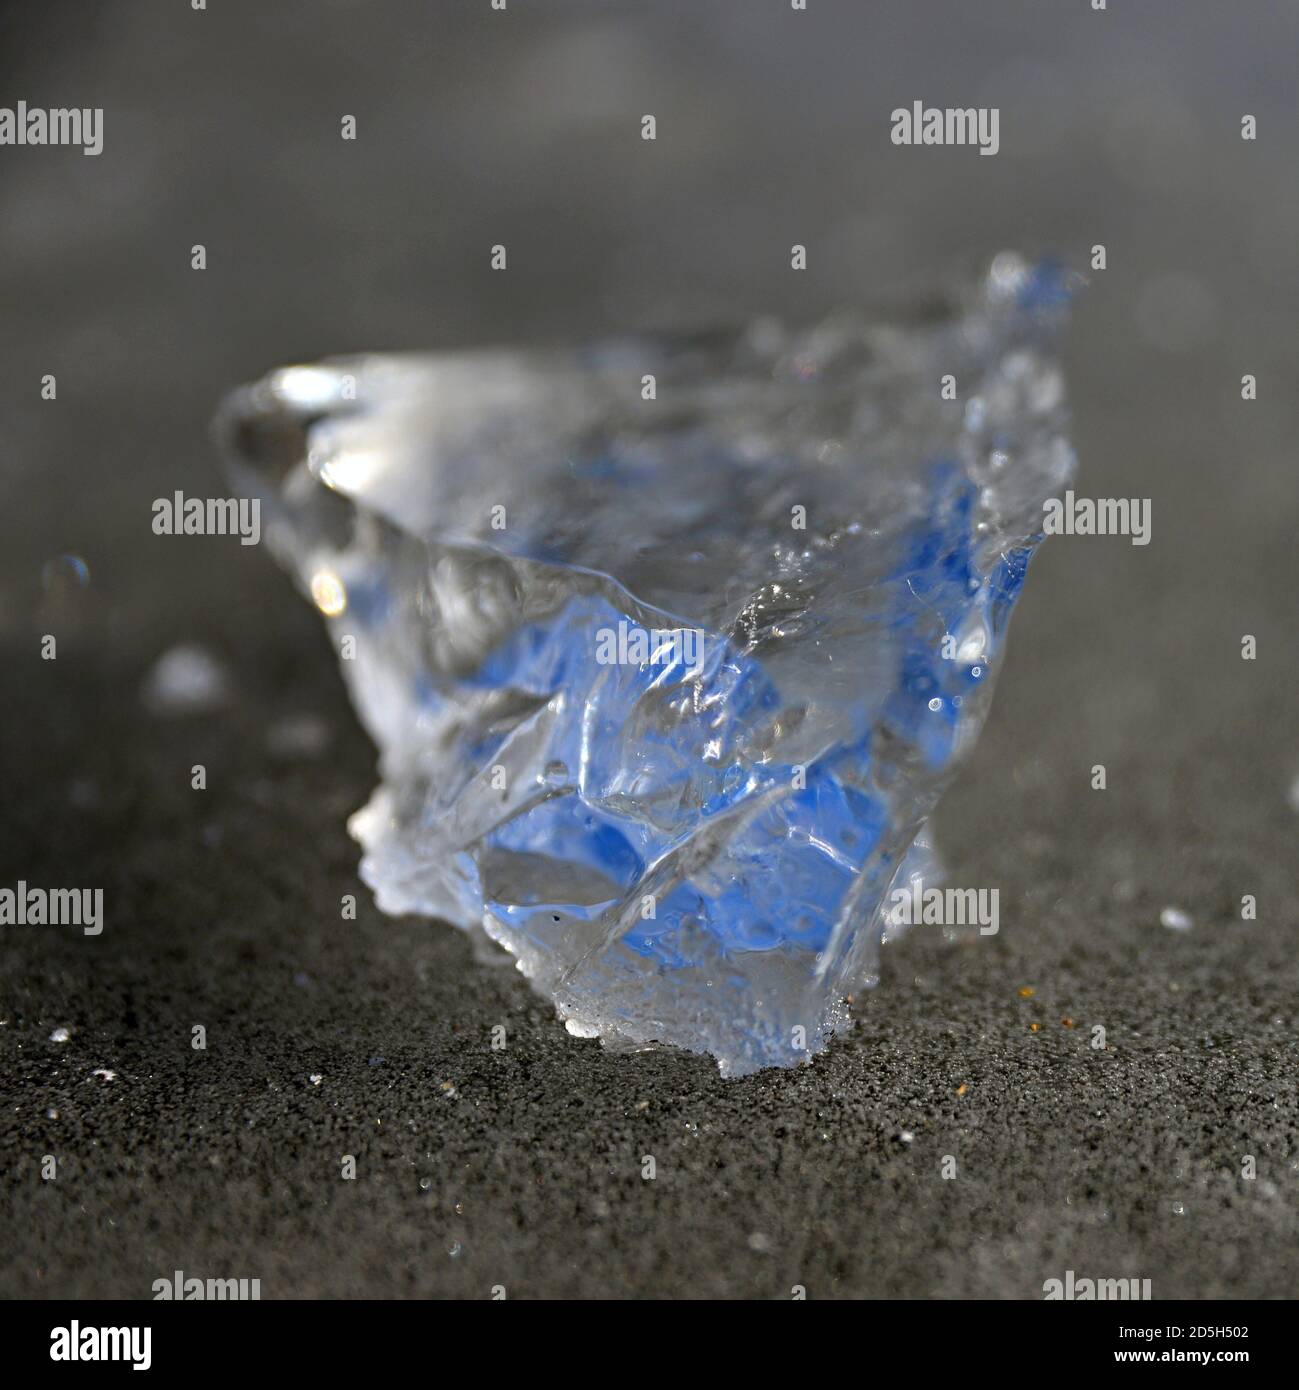 Fragment of ice from near. Transparent bluish ice on the ground. Stock Photo